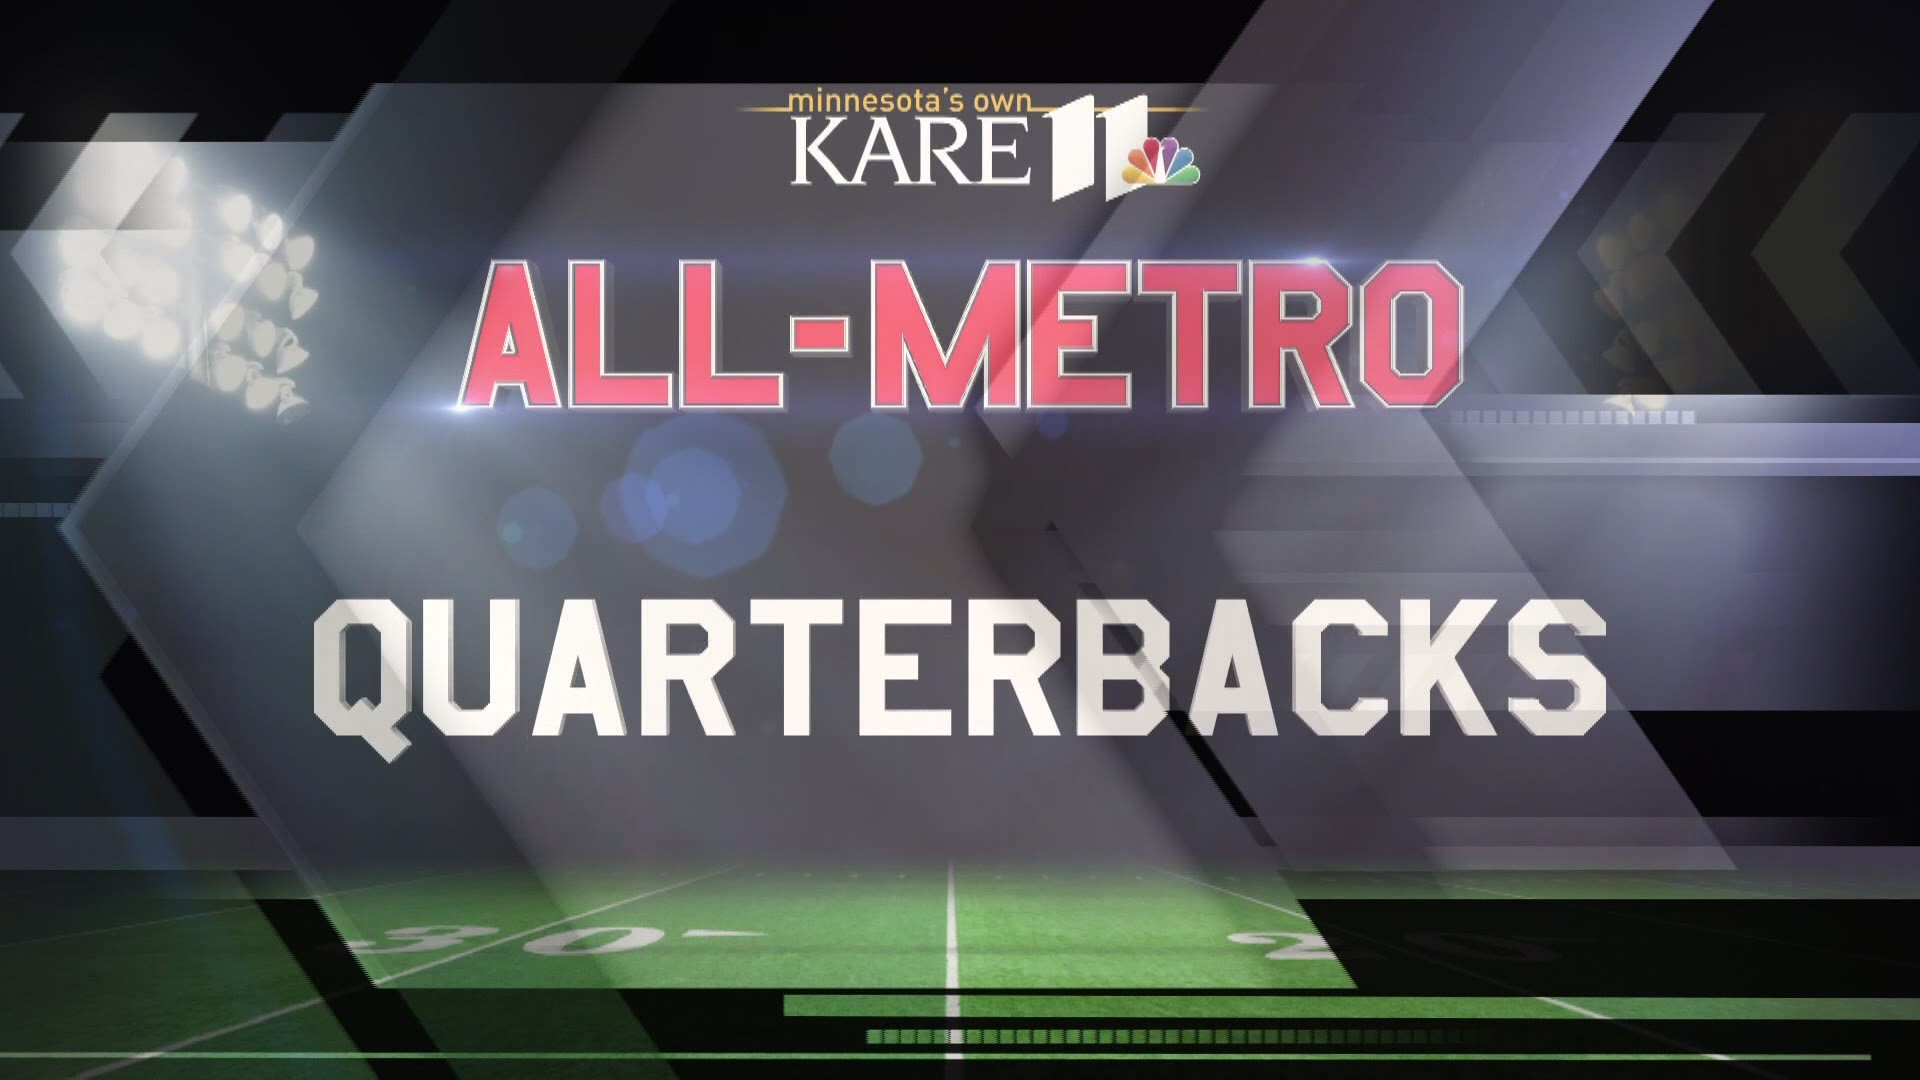 This is the 33rd season for the KARE 11 All-Metro Football team.